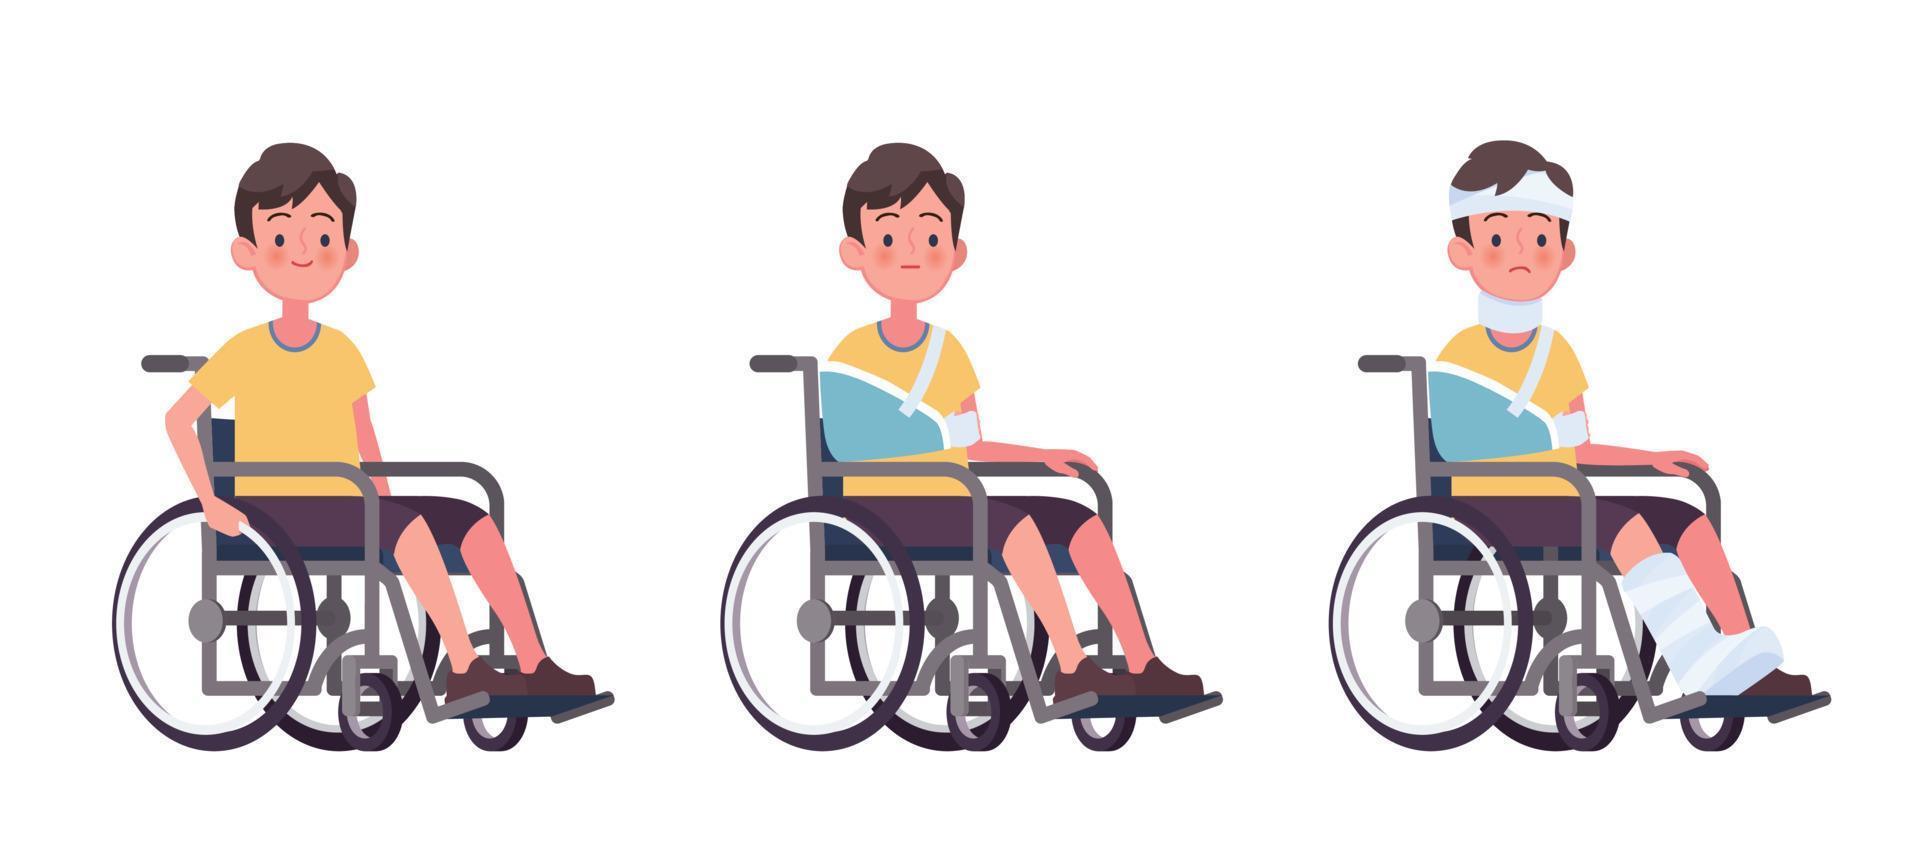 Young man in wheelchairs set, cartoon vector illustration. Injury and disability concept, rehabilitation from accident.